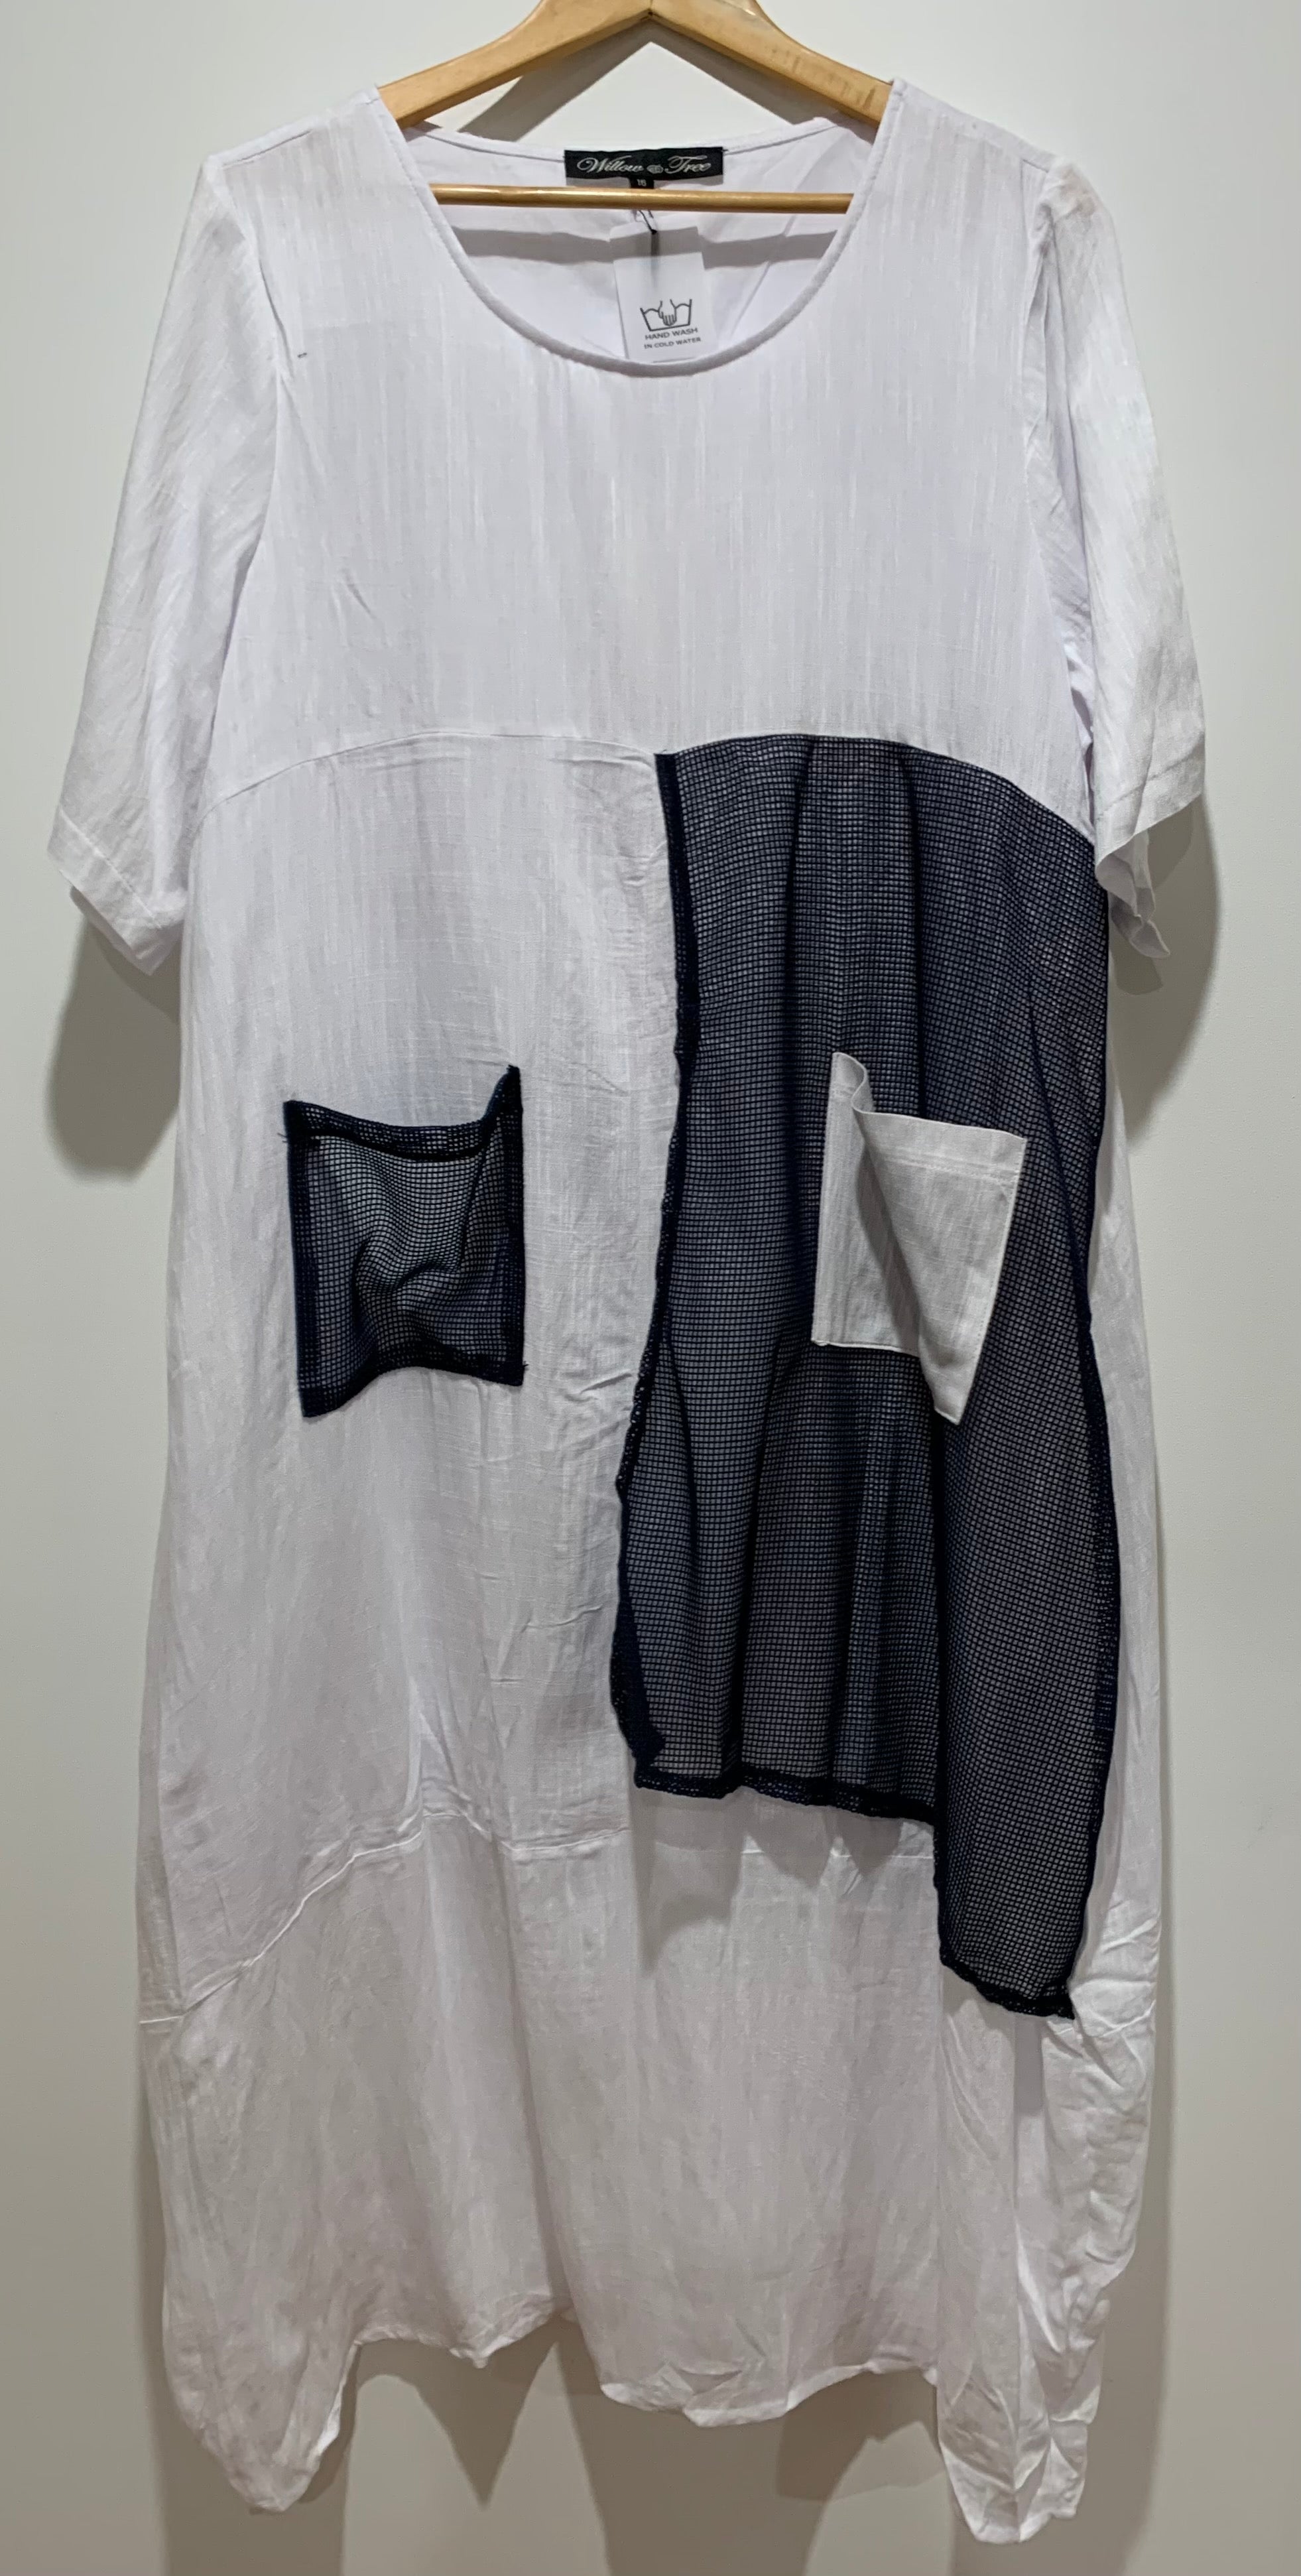 Linen Blend Dress in White with Navy Mesh Pocket Detail - Willow Tree